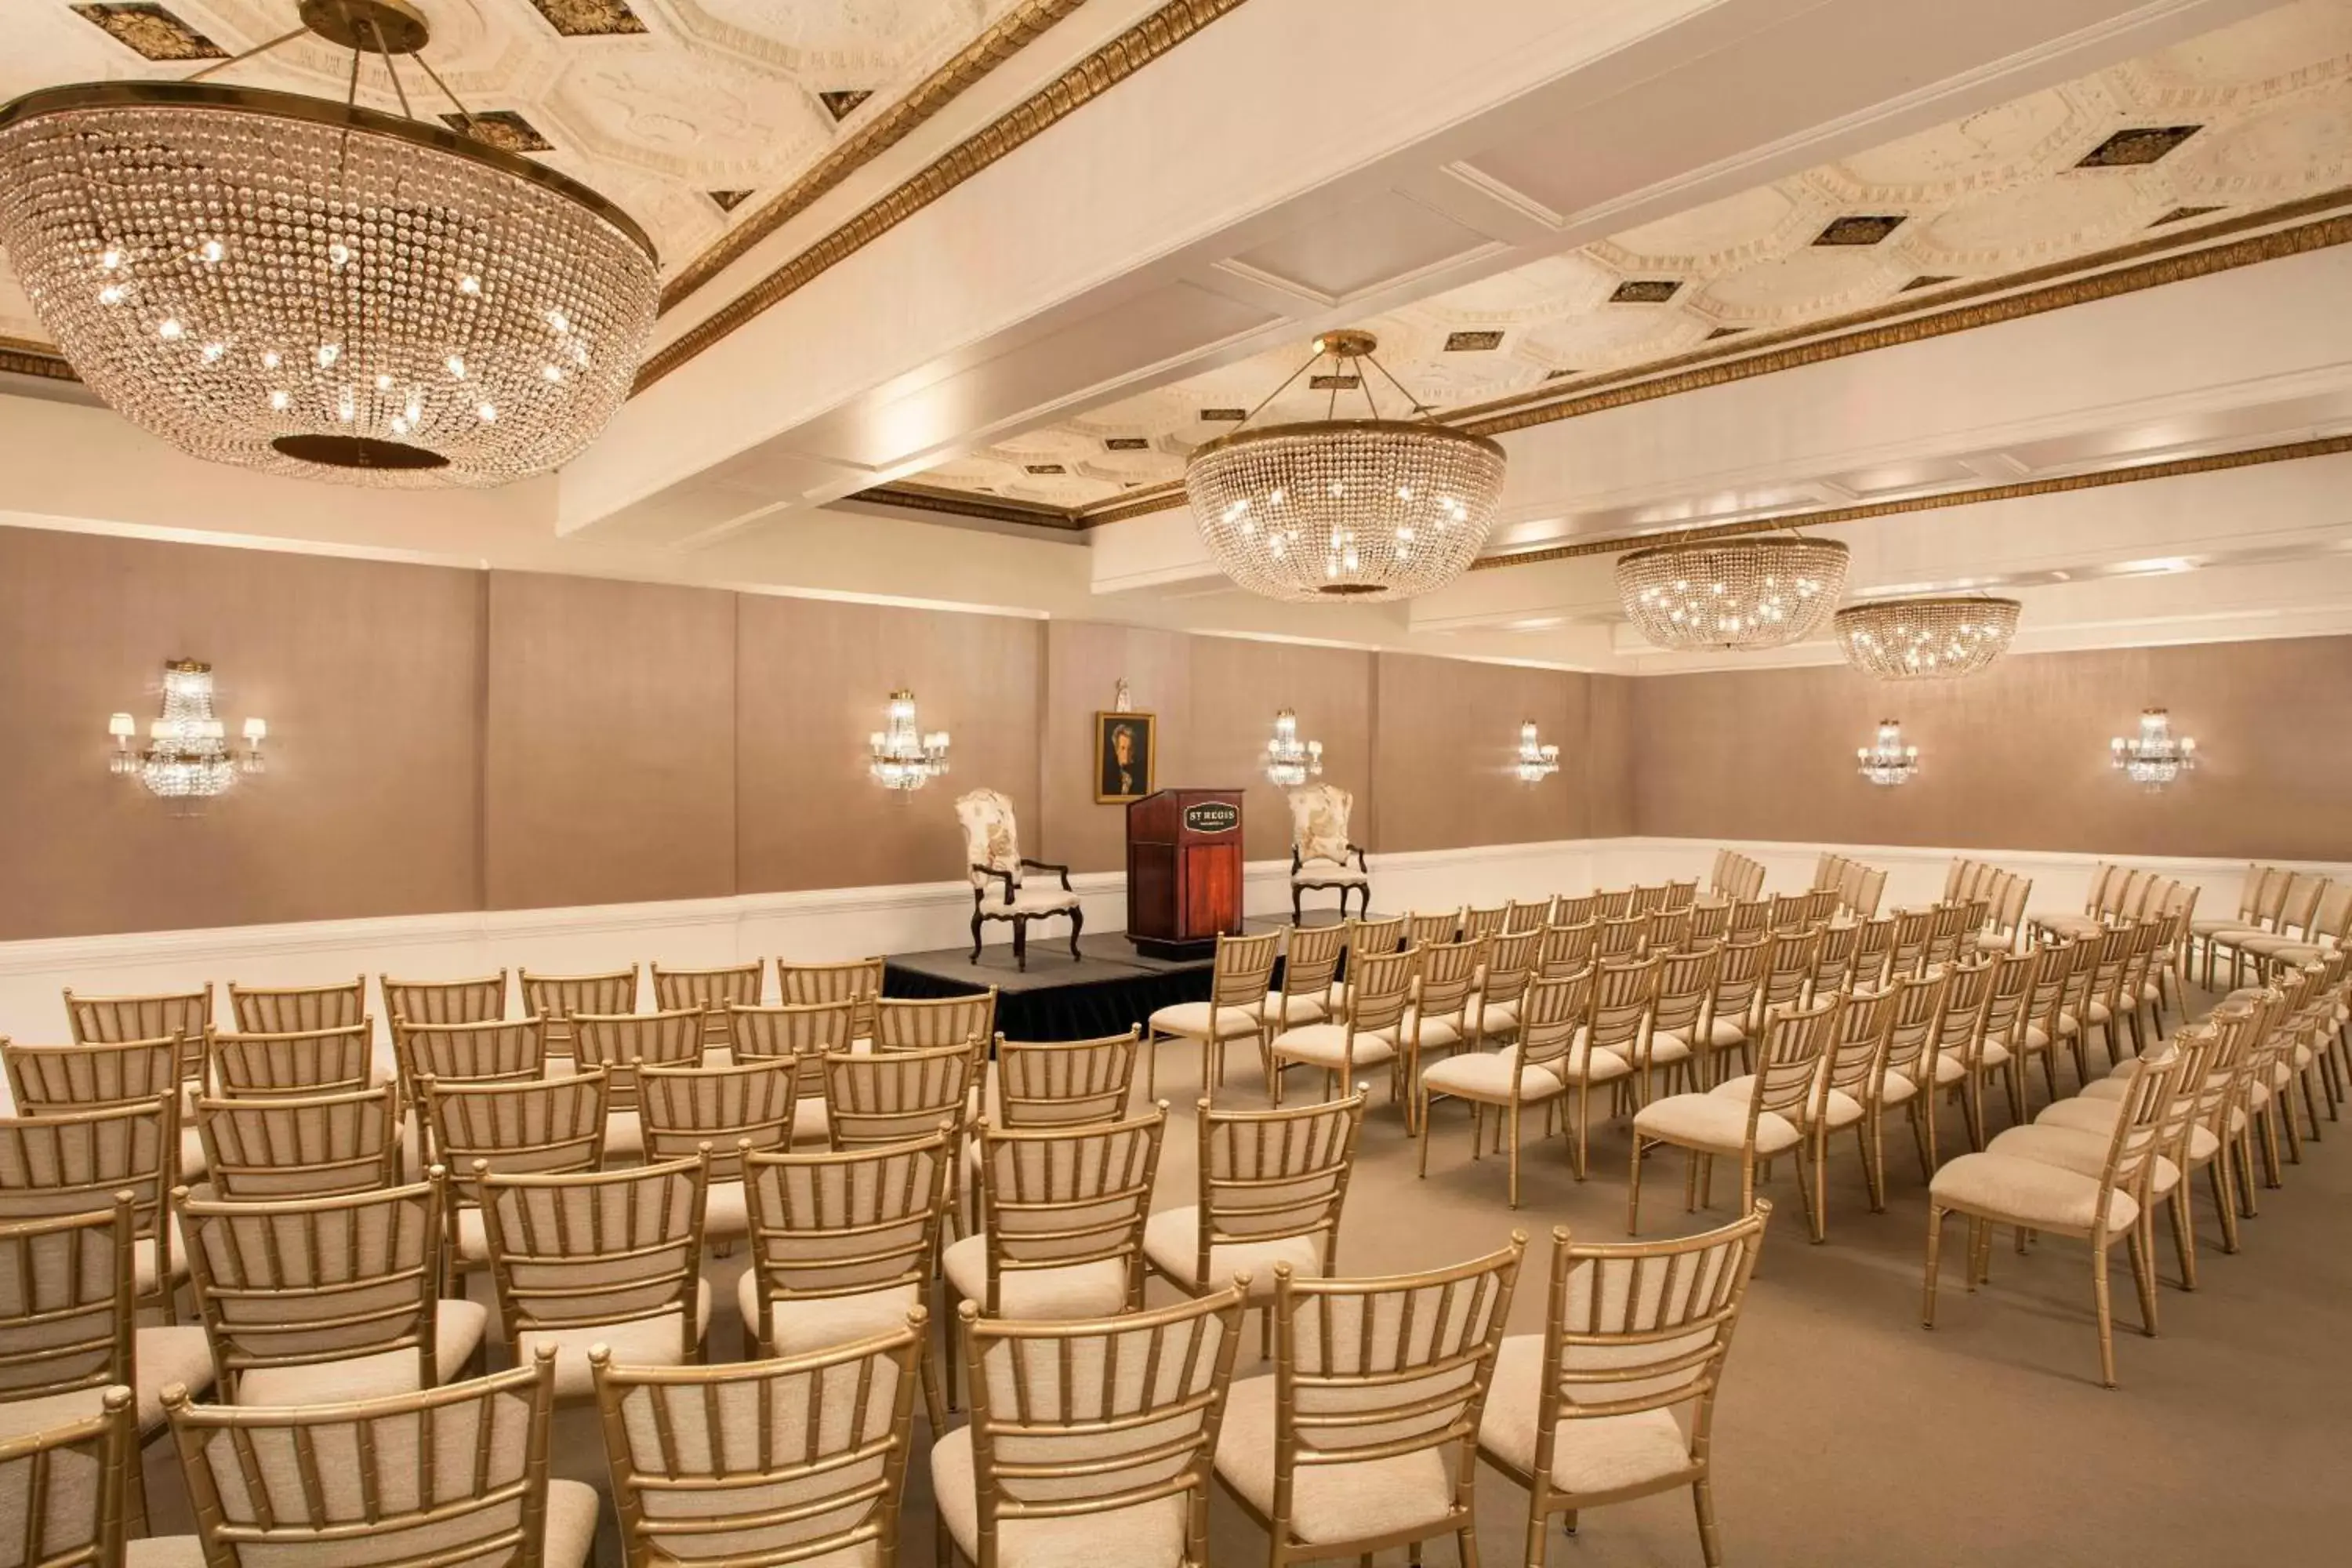 Meeting/conference room, Banquet Facilities in The St. Regis Washington, D.C.